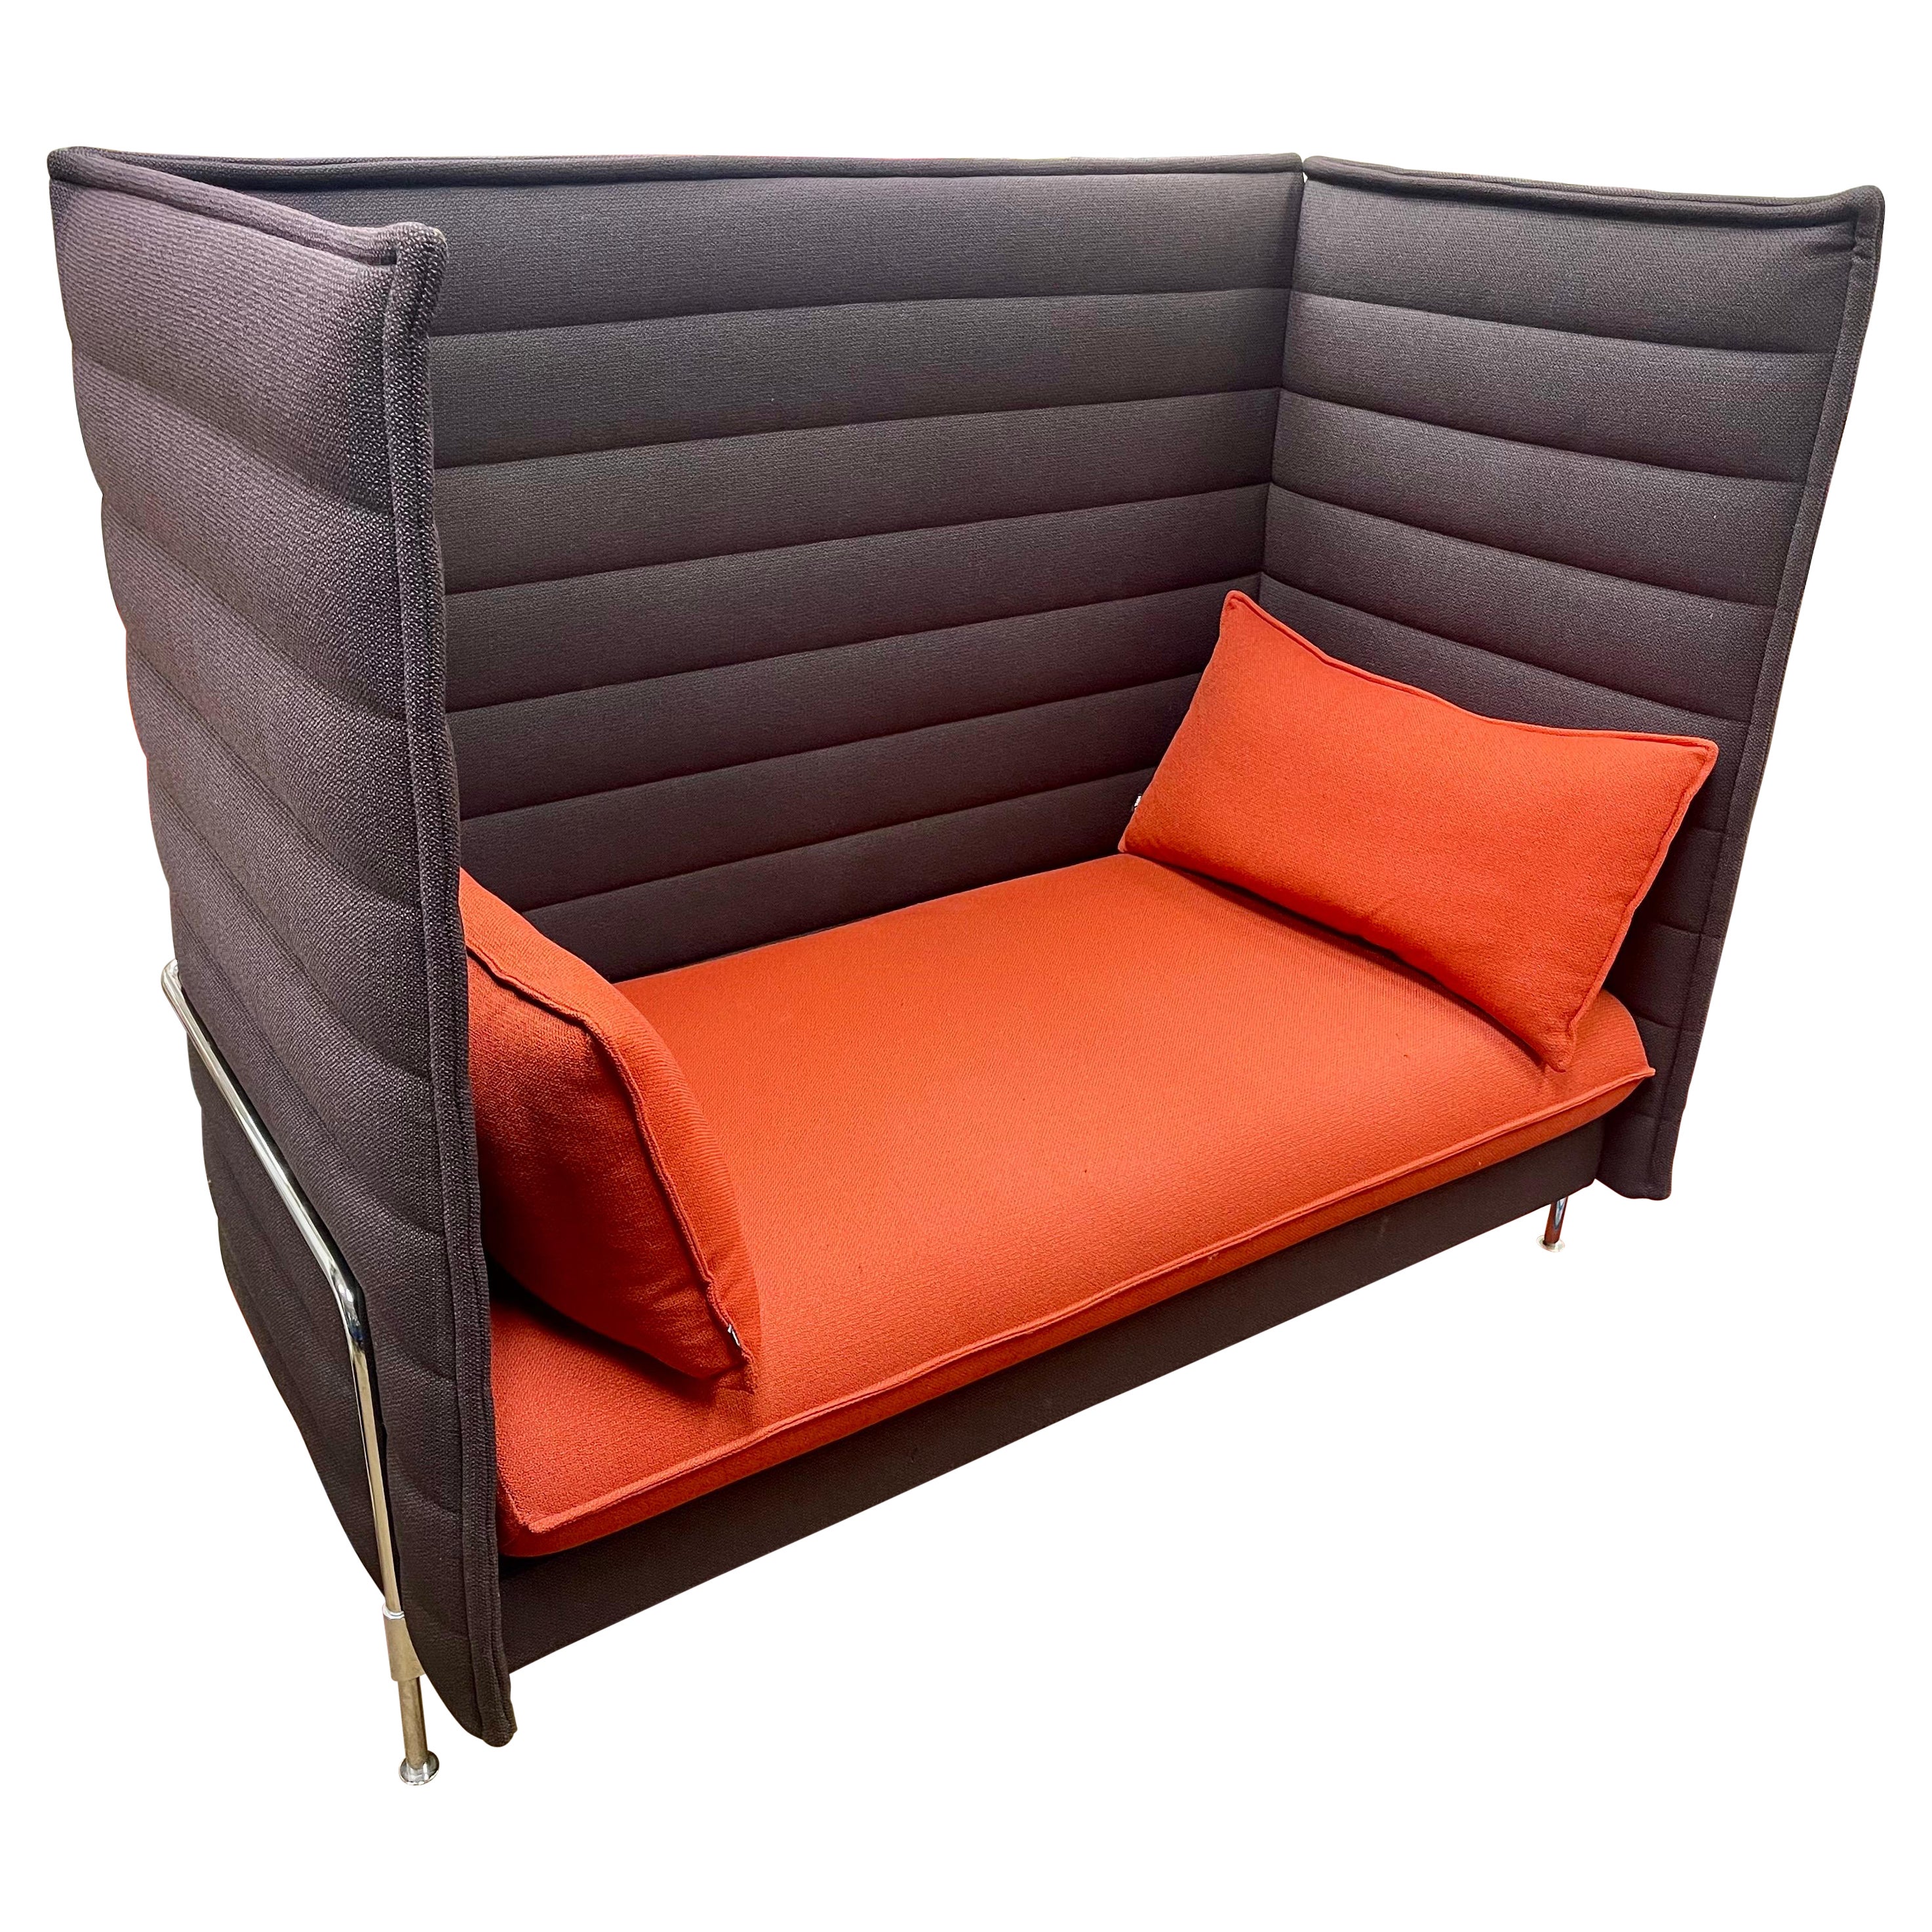 Vitra Alcove High Back Sofa by Ronan & Erwan Bouroullec 2008 For Sale